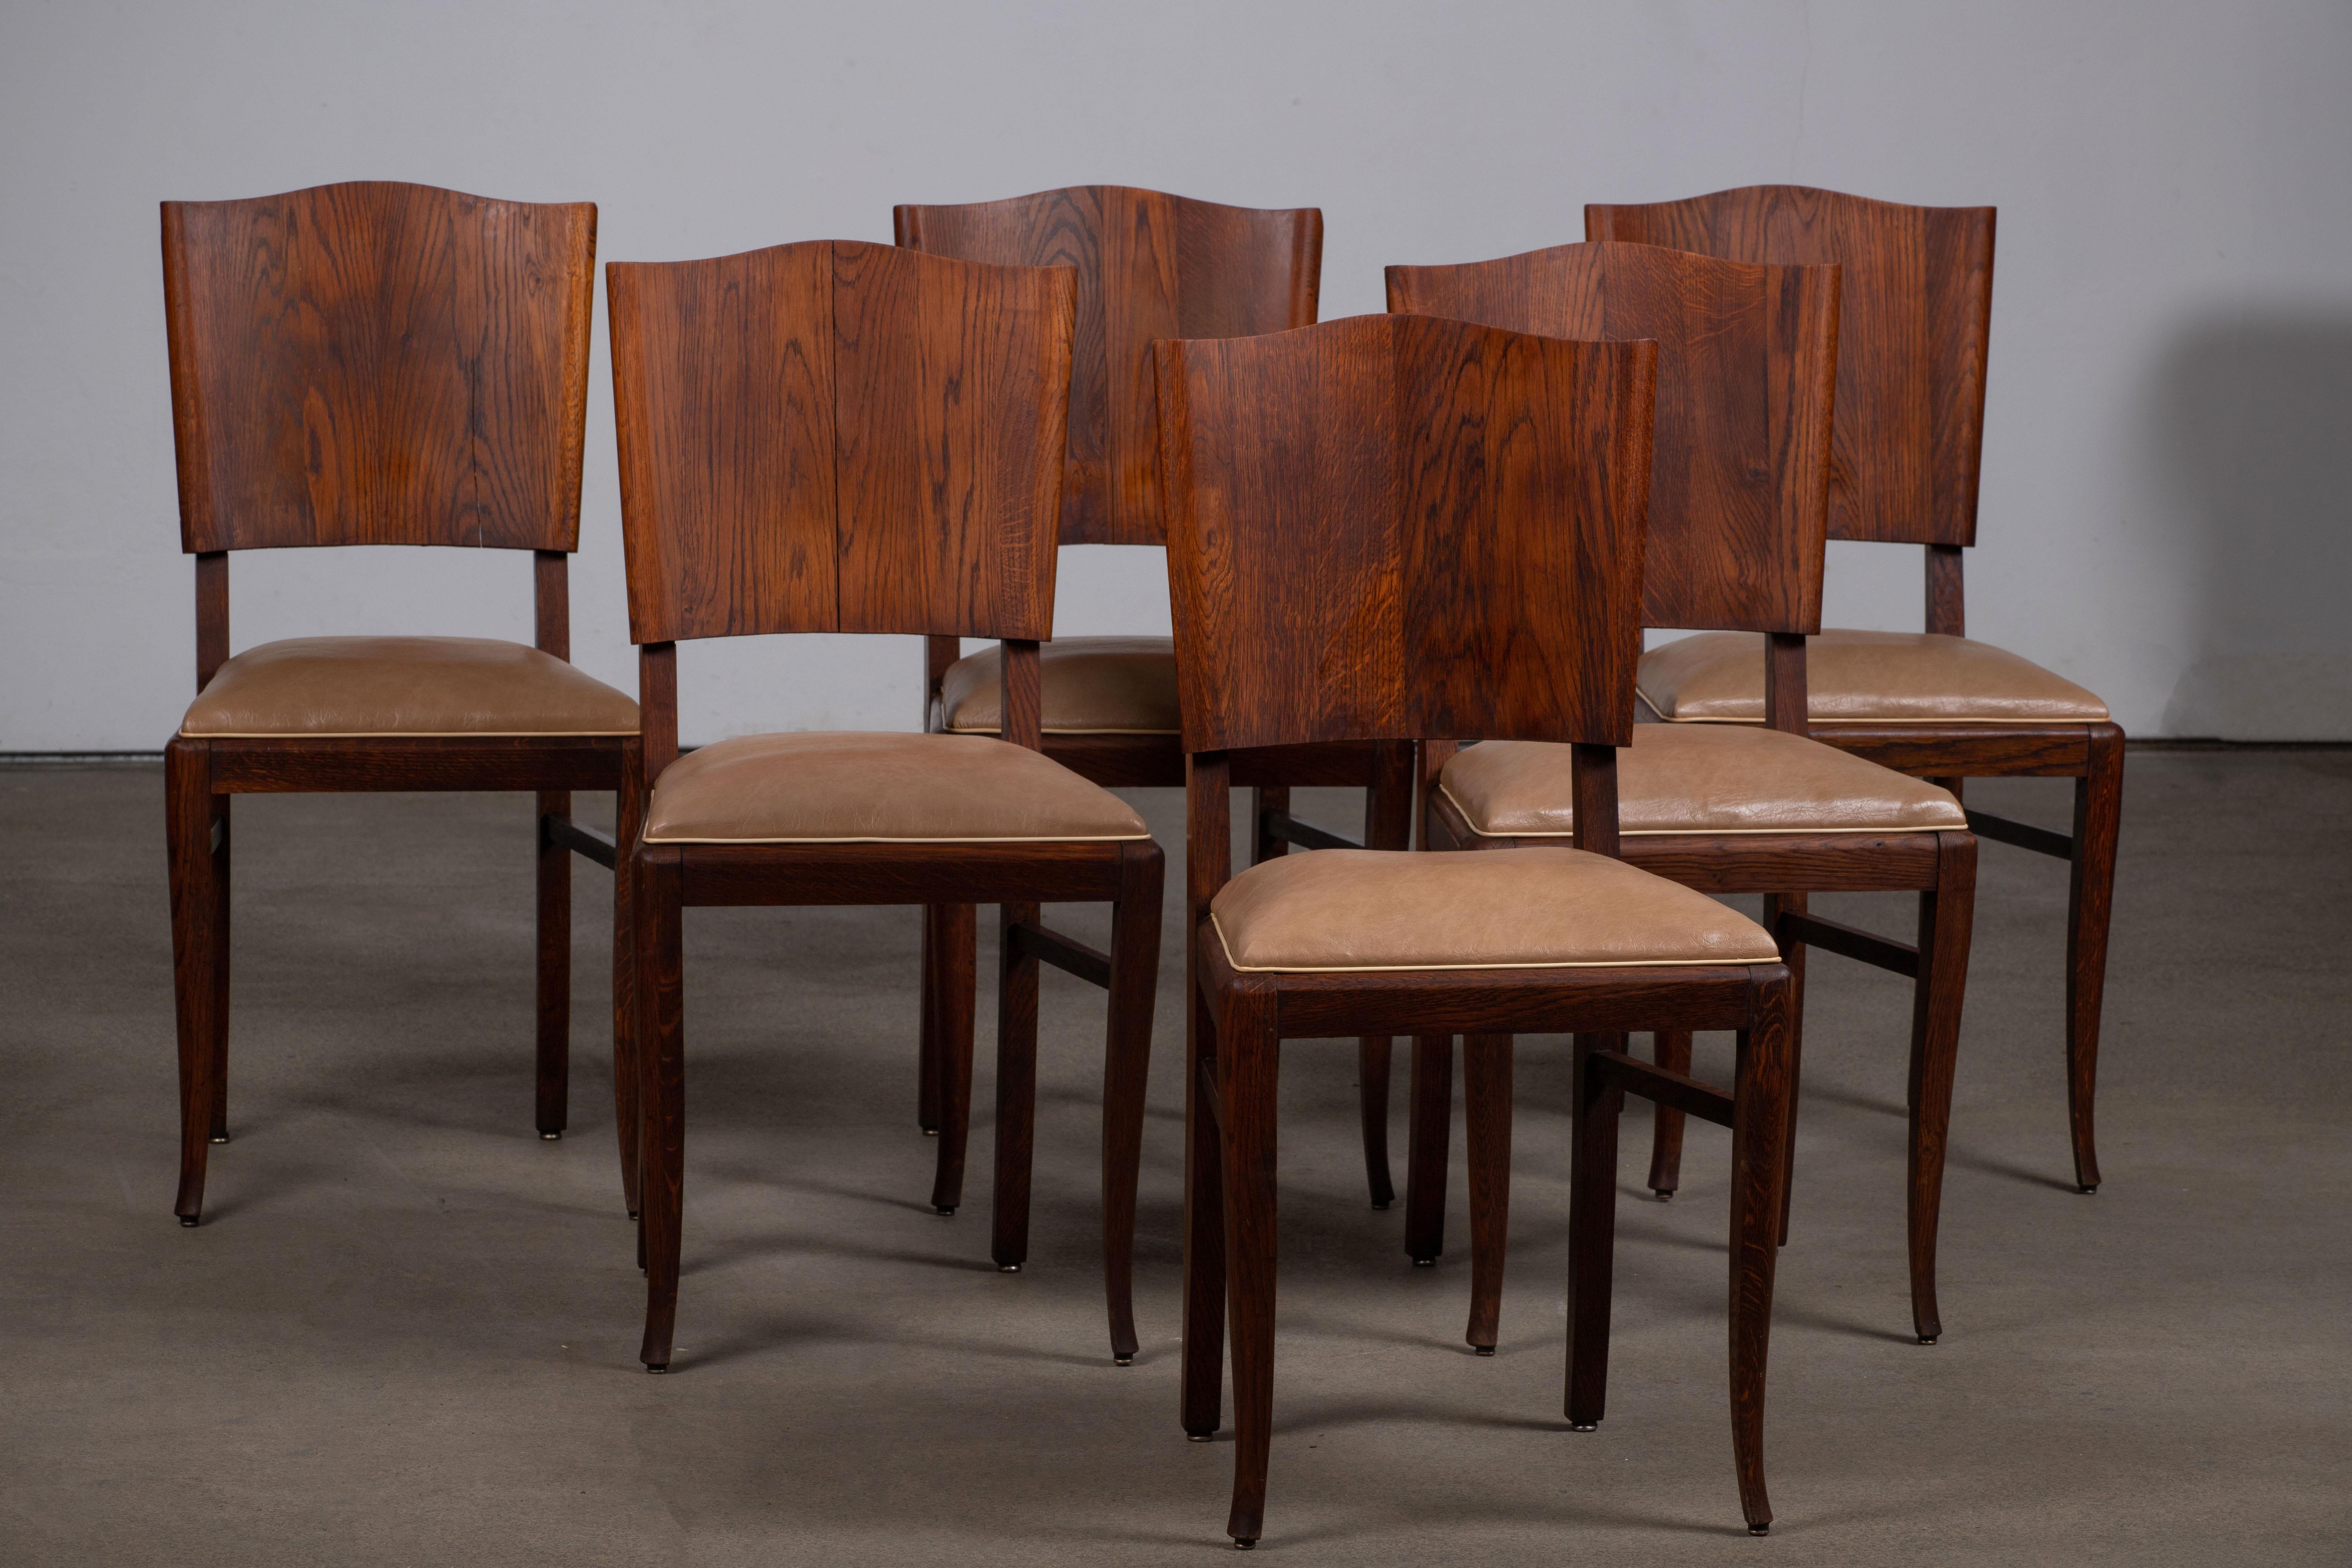 This set of six French Art Deco dining chairs in solid oak was created in the 1940s inspired by the work of Charles Dudouyt.

We can clearly see the work of the French school of the 1940s. The detailed and graphic designed backrest panels will meet